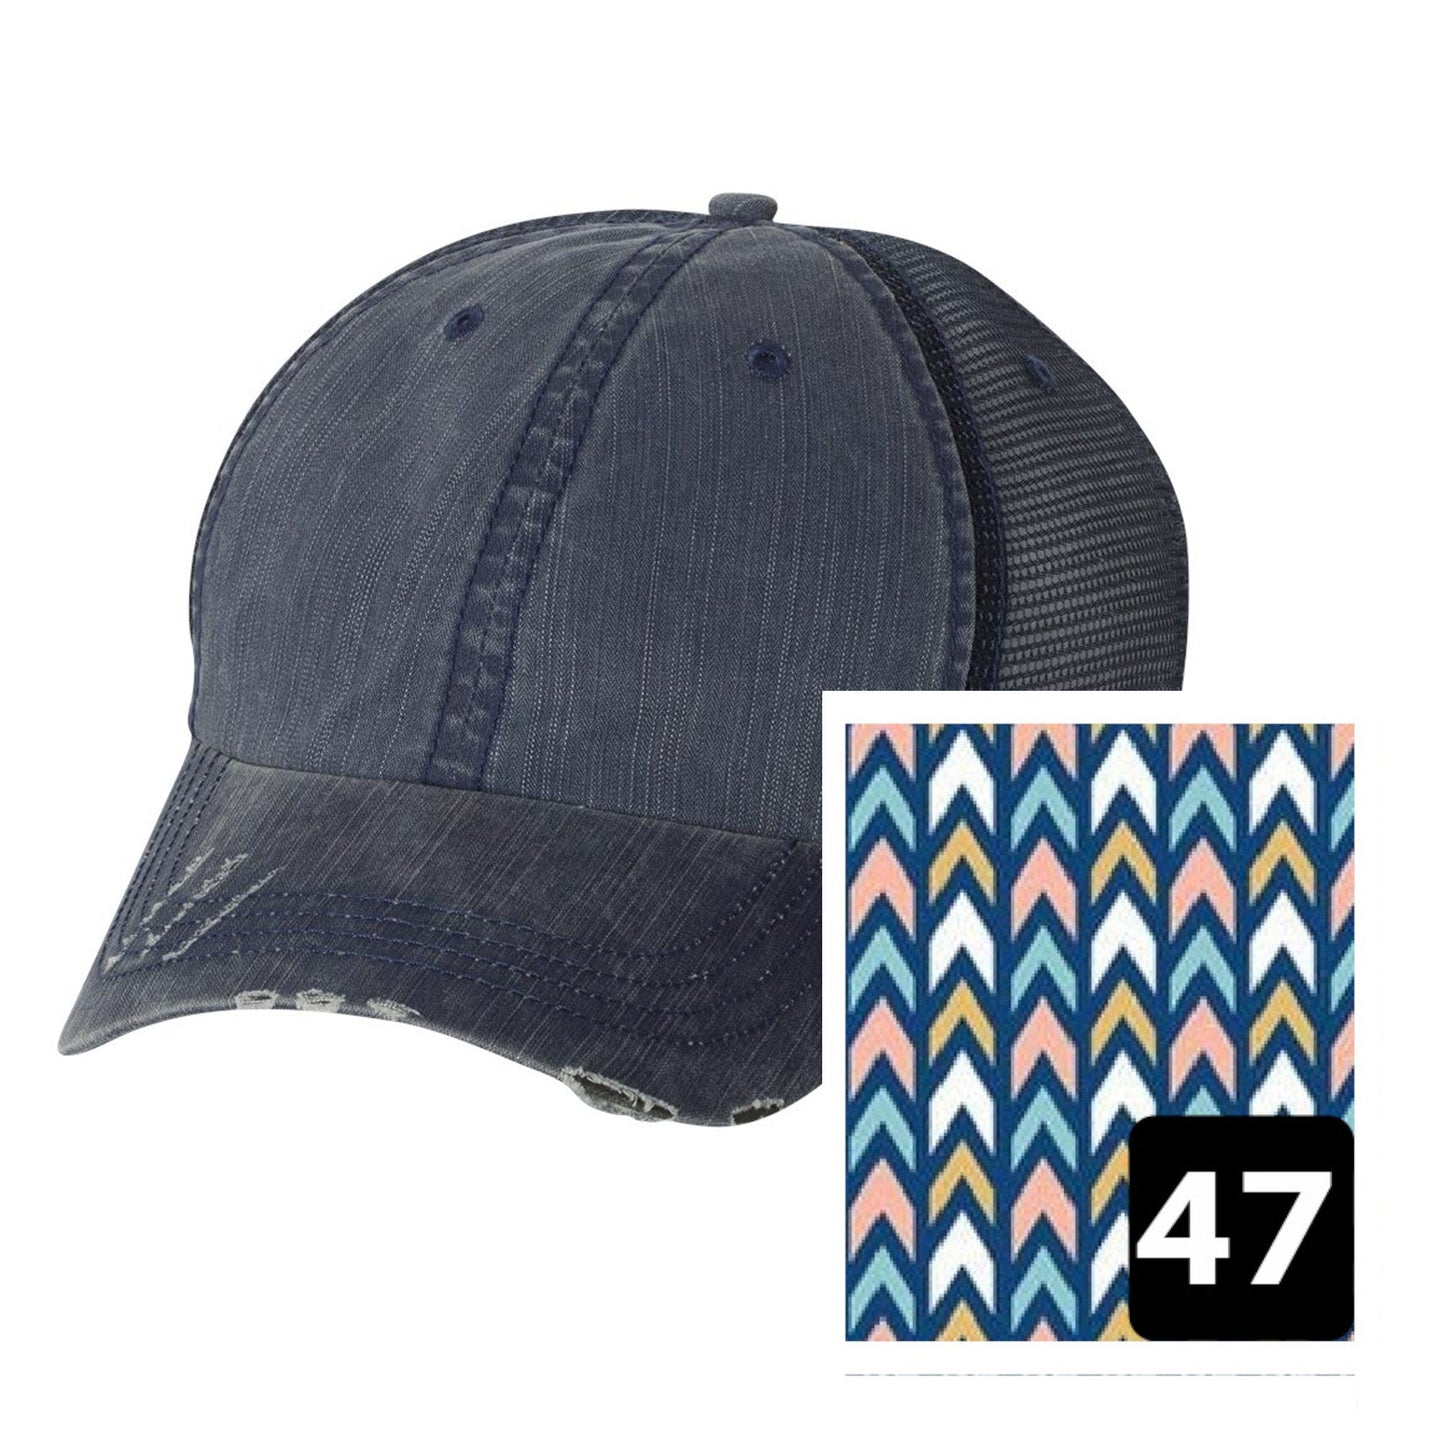 Mississippi Hat | Navy Distressed Trucker Cap | Many Fabric Choices